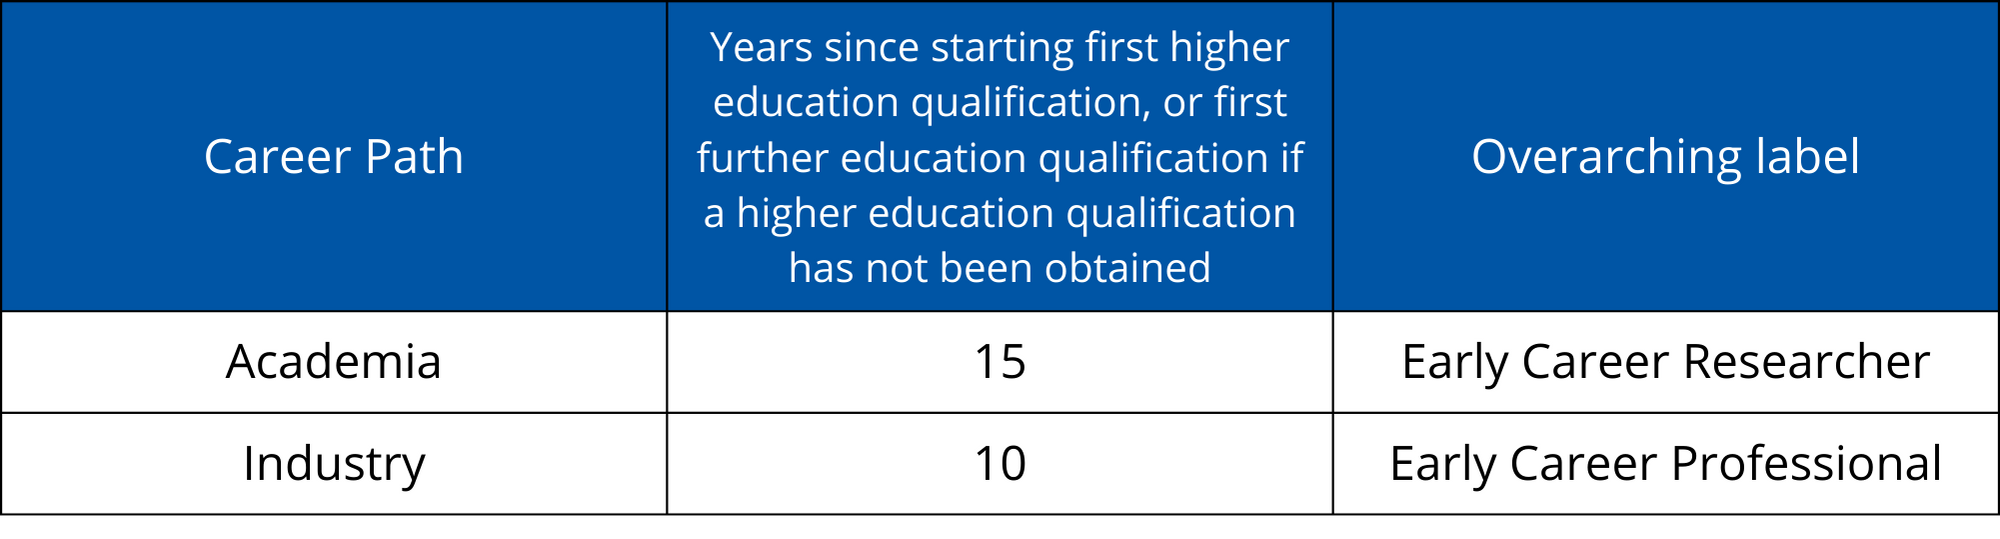 Table showing new RMetS early career definition criteria